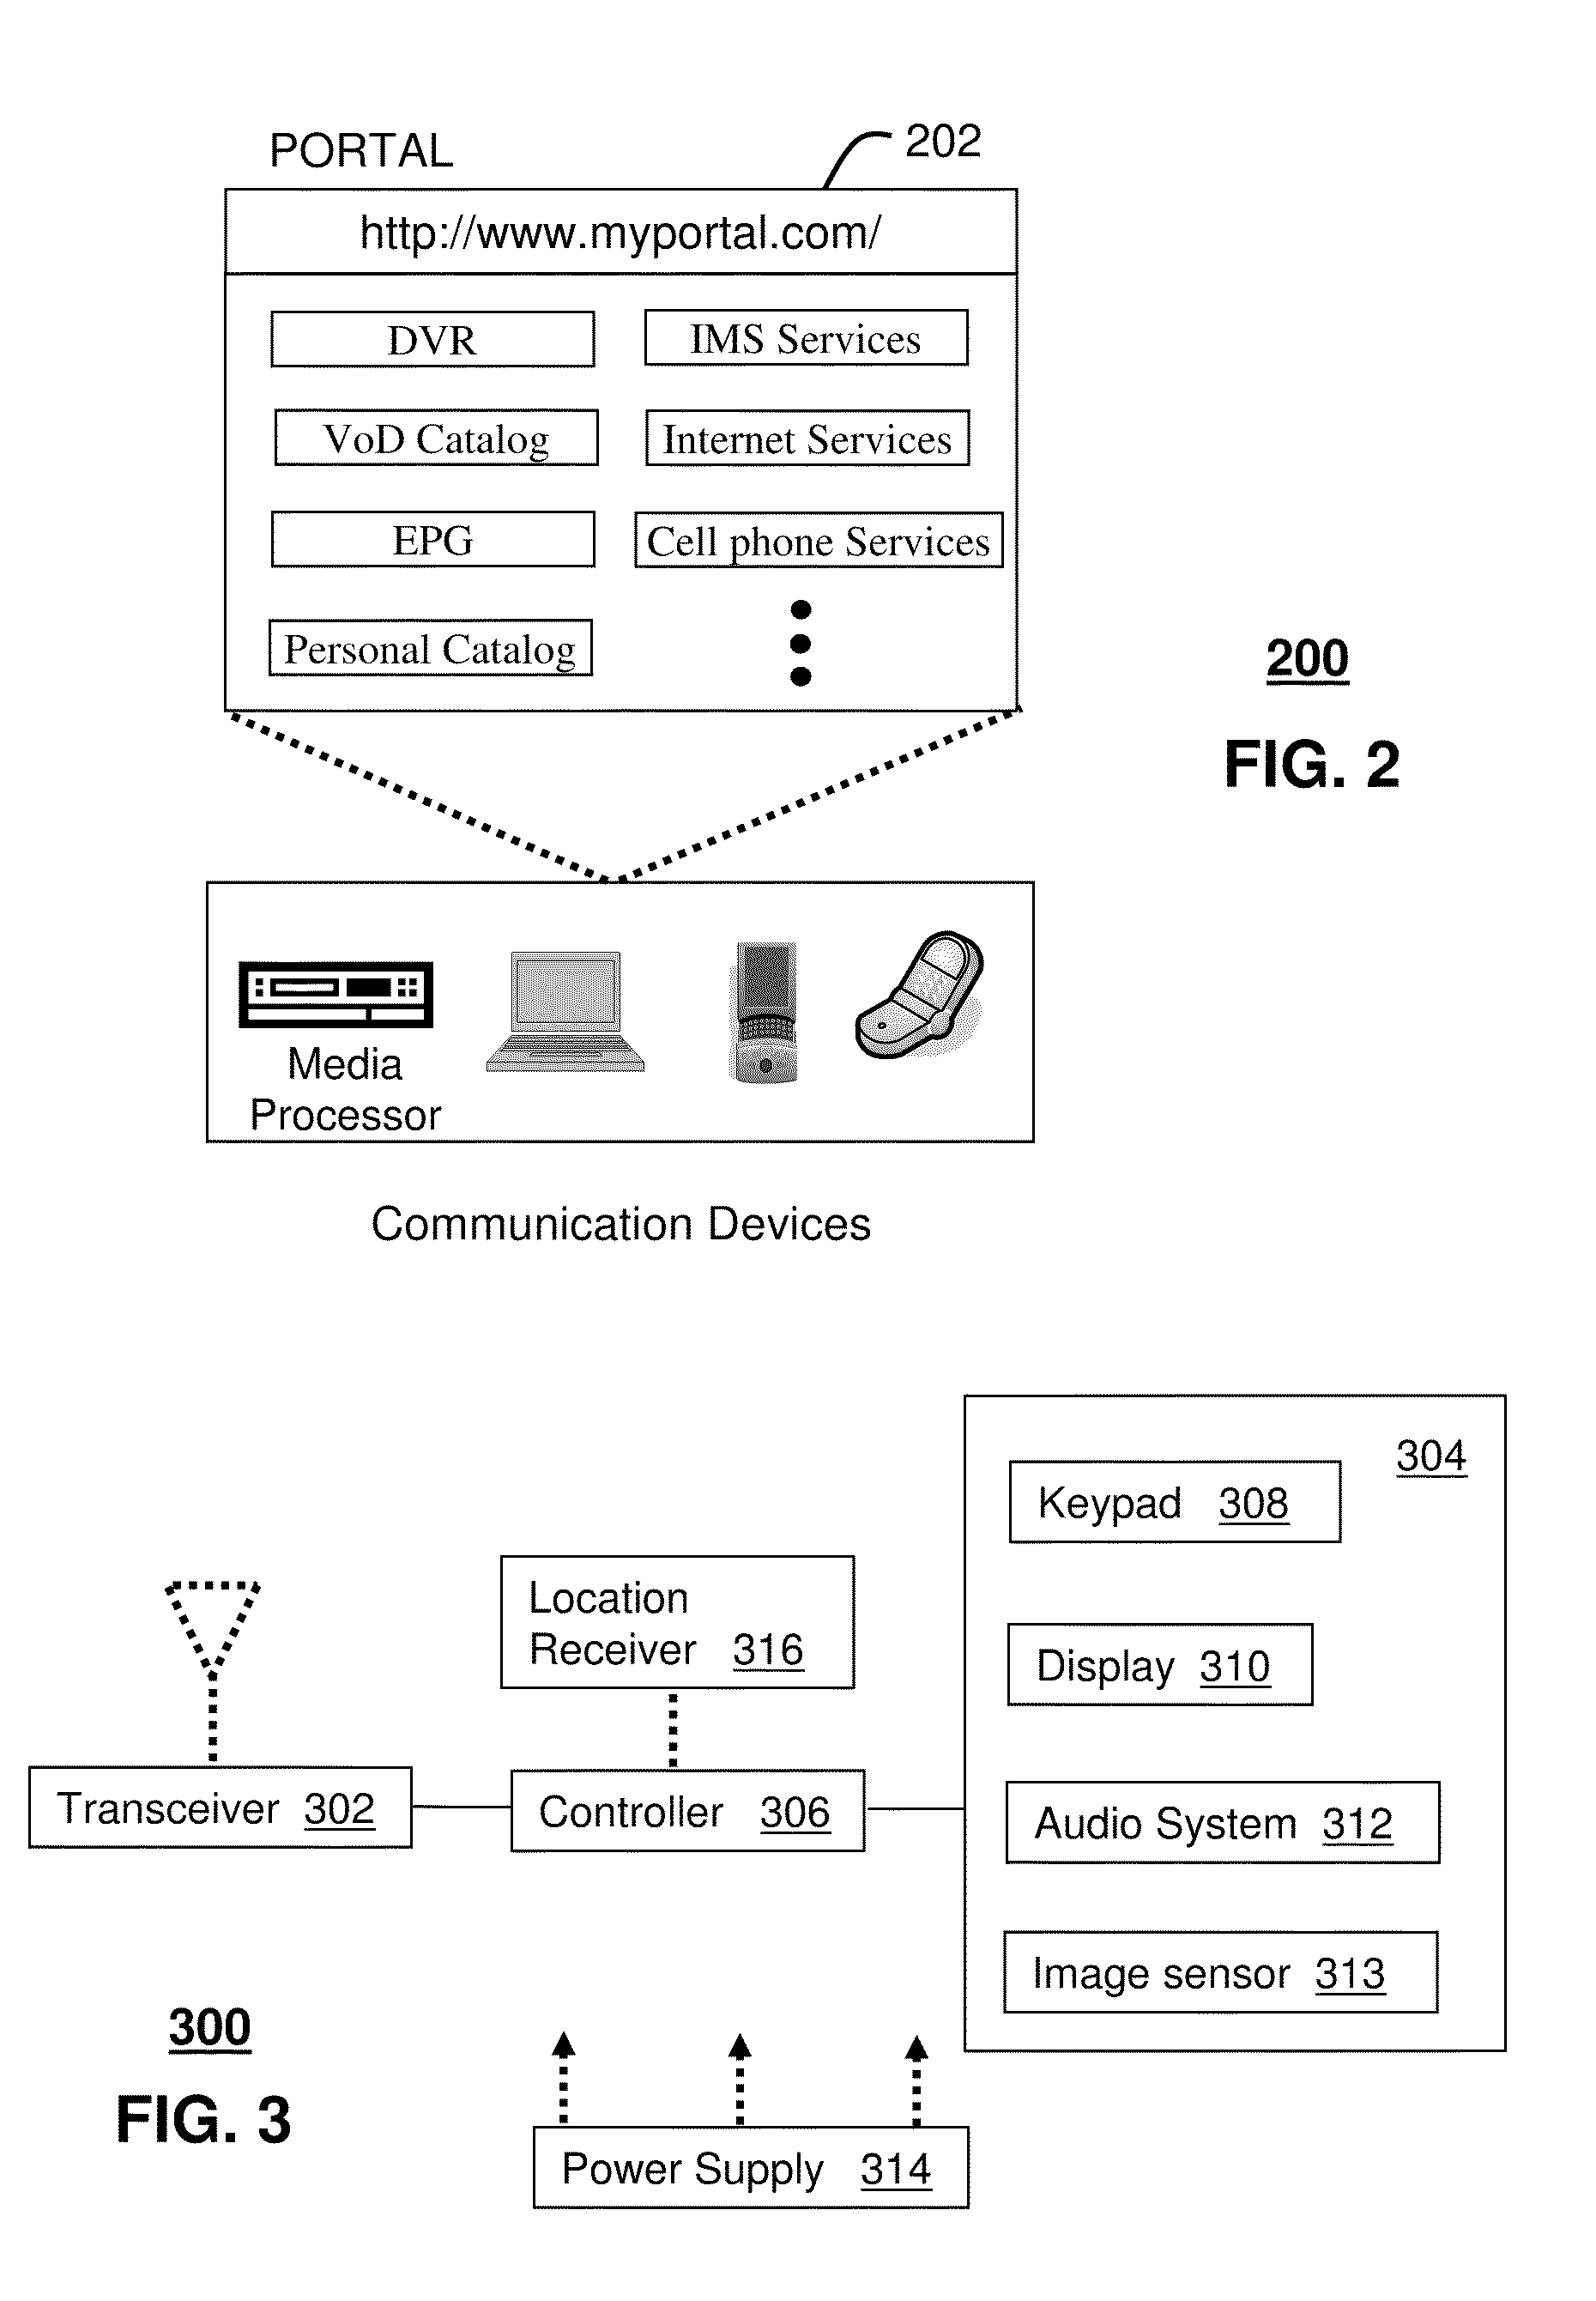 Method and apparatus for staged content analysis